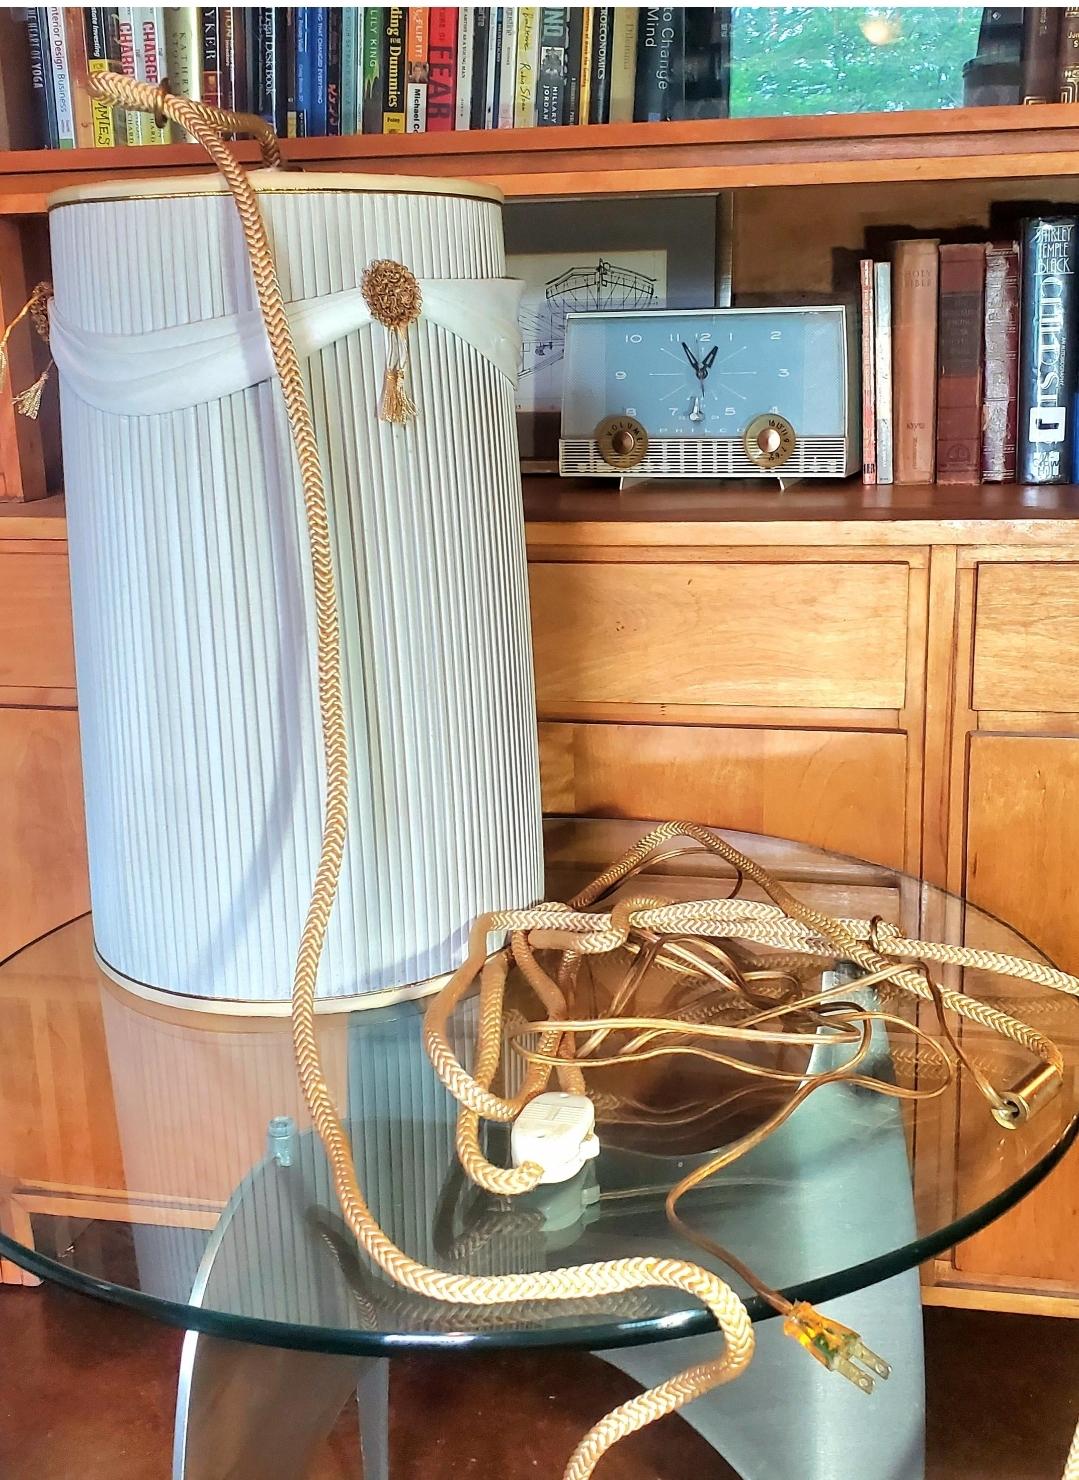 1960s
Leviton.
Puts a beautiful ambiance in a room.
Vintage pleated Drum swag lamp.
Gold metal florets.
Rope cord has 2 loops for hooks.
Rope cord is more than 10 feet, regular cord is another @6 feet.
Nice, quality working hardware. 